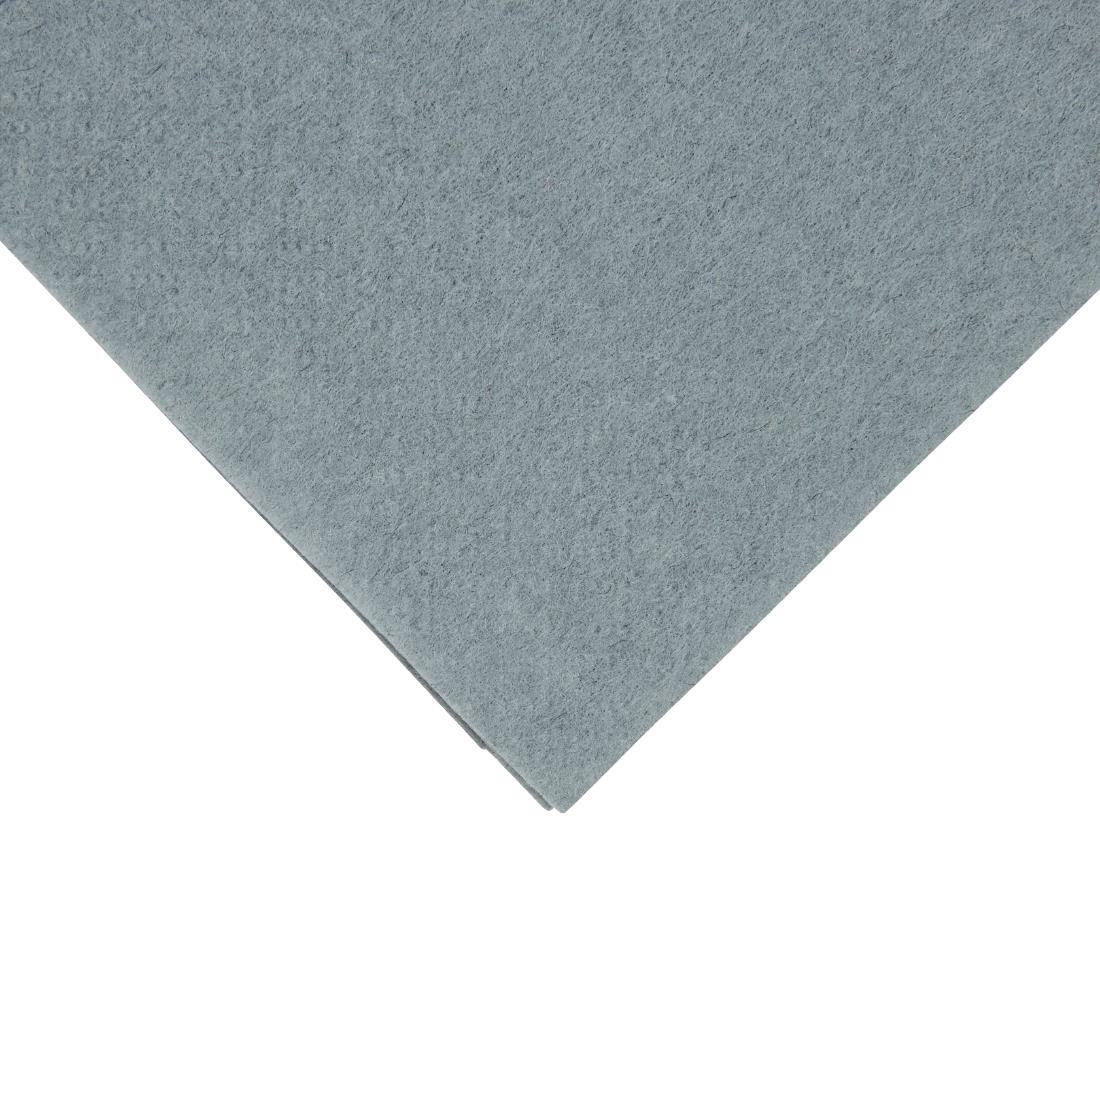 Fiesta Recyclable Lunch Napkin Grey 33x33cm 2ply 1/8 Fold (Pack of 2000) - FE231  - 2